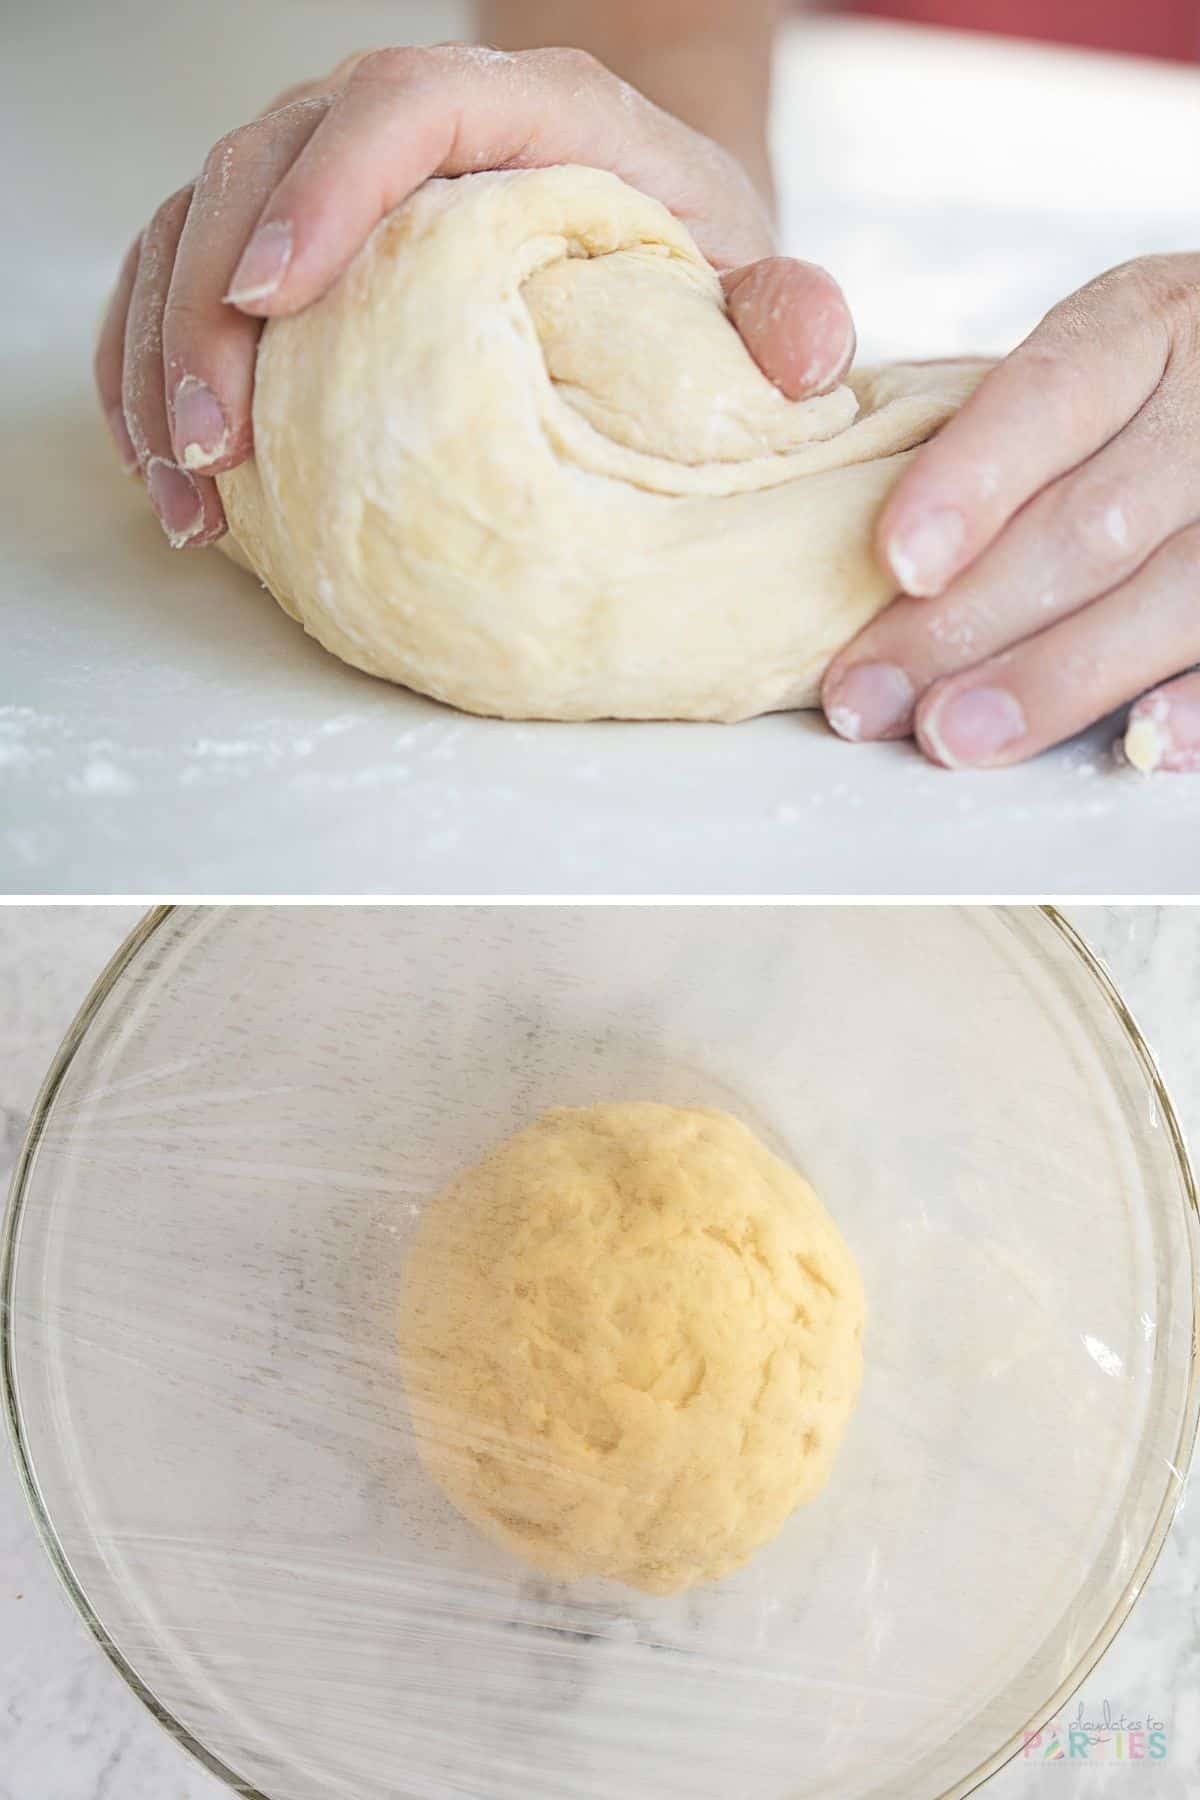 How to make homemade cinnamon rolls steps 3 and 4.